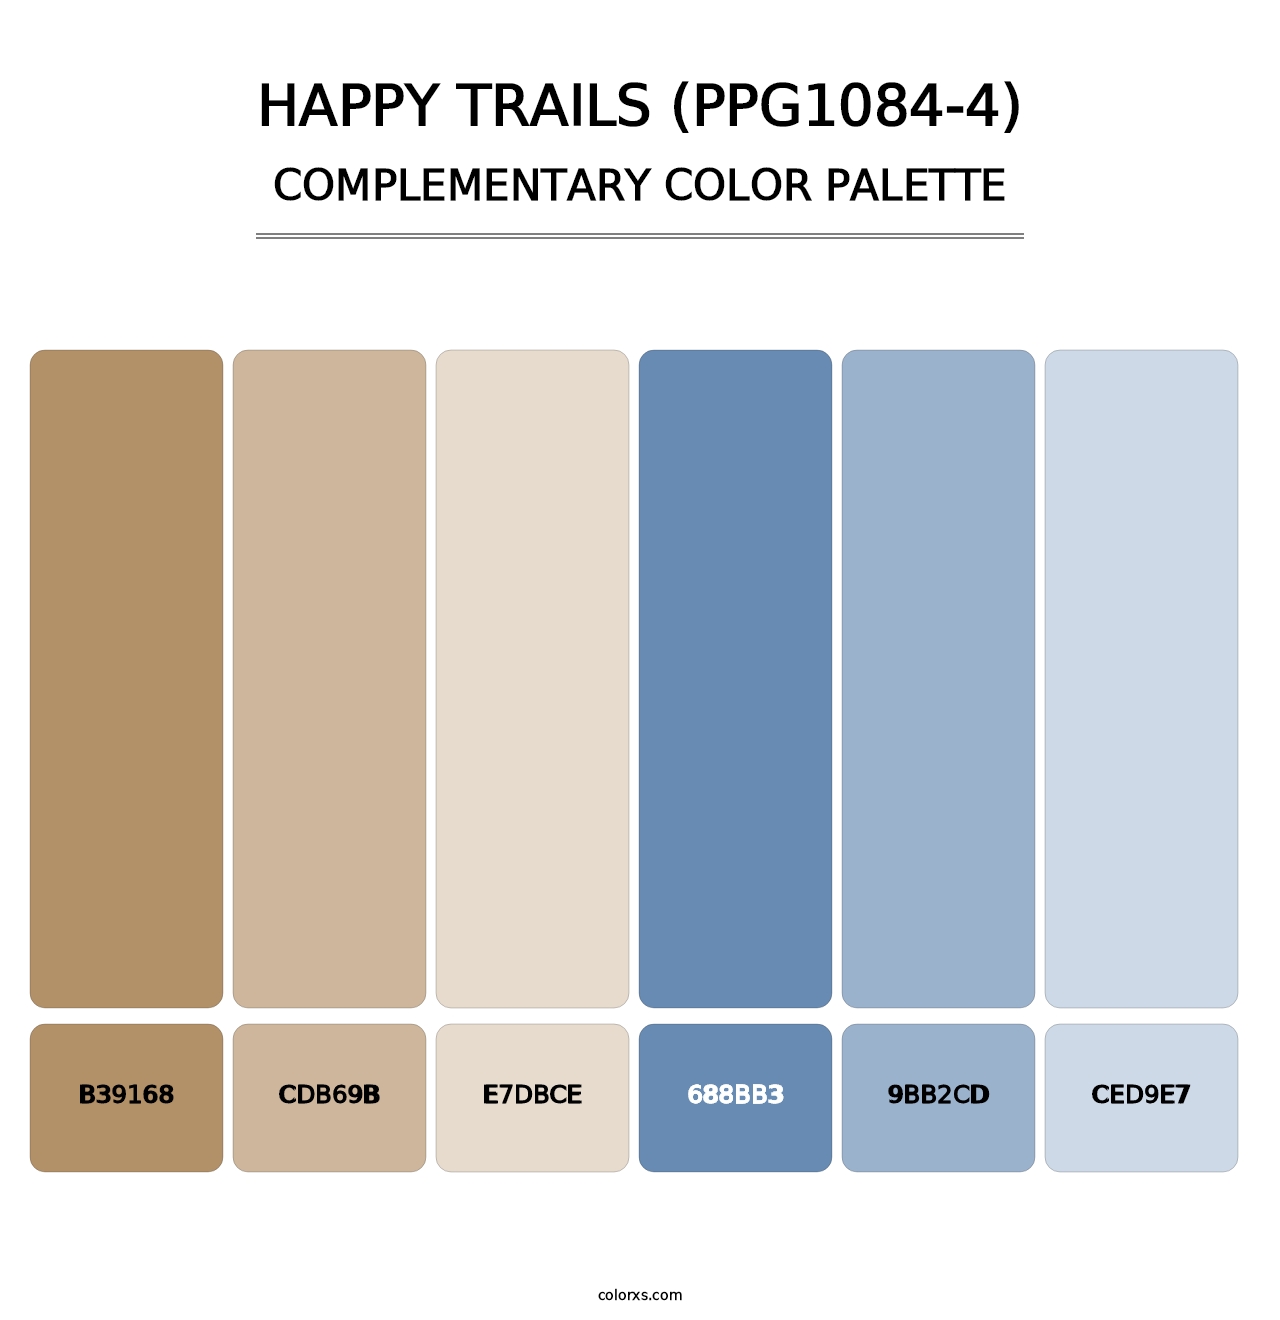 Happy Trails (PPG1084-4) - Complementary Color Palette